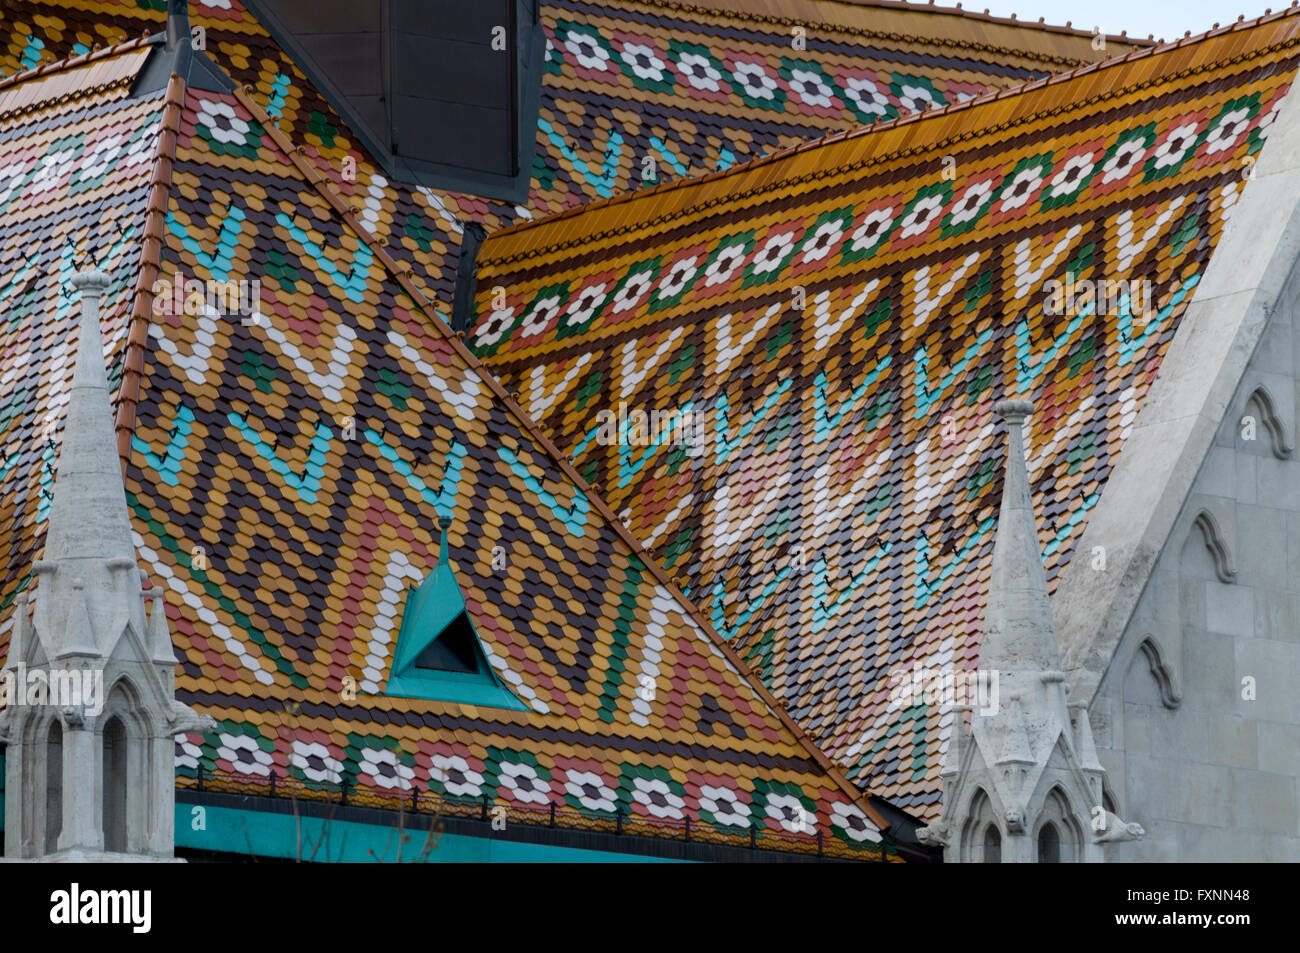 The coloured tiled roof of Matthias Church on Buda Castle hill in Budapest, Hungary. Stock Photo